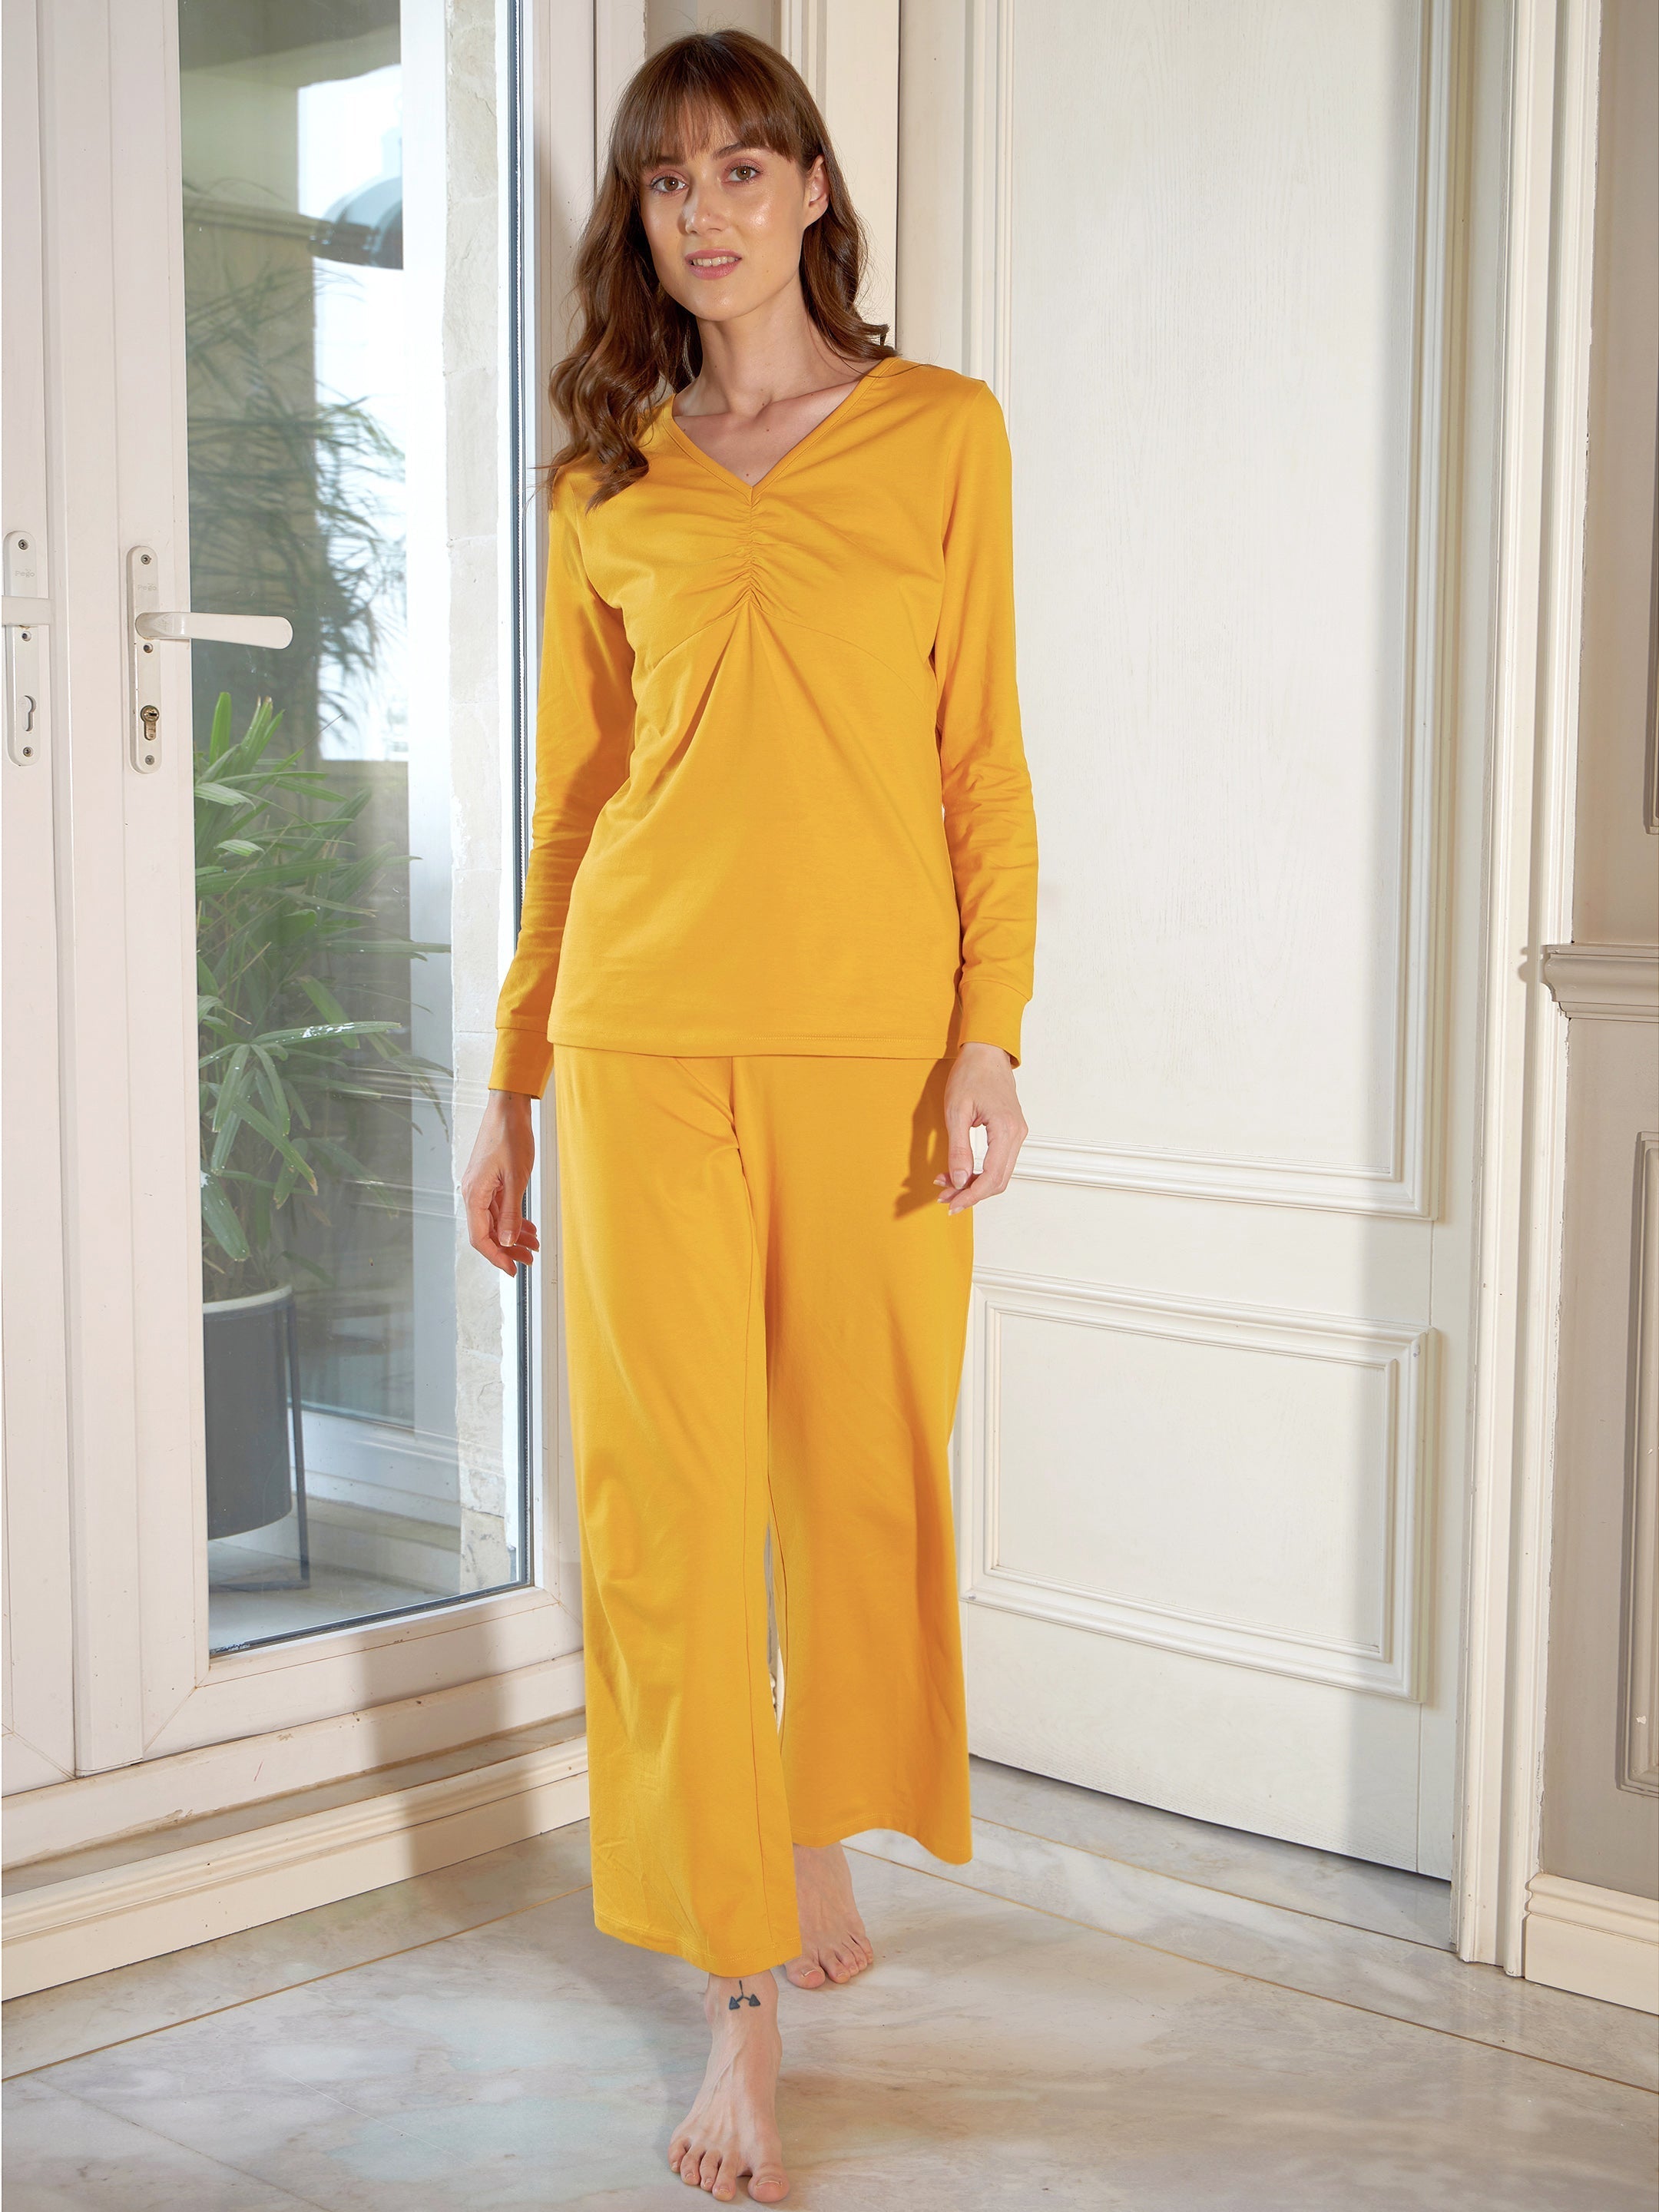 Women's Mustard Ruched T-Shirt With Lounge Pants - SASSAFRAS